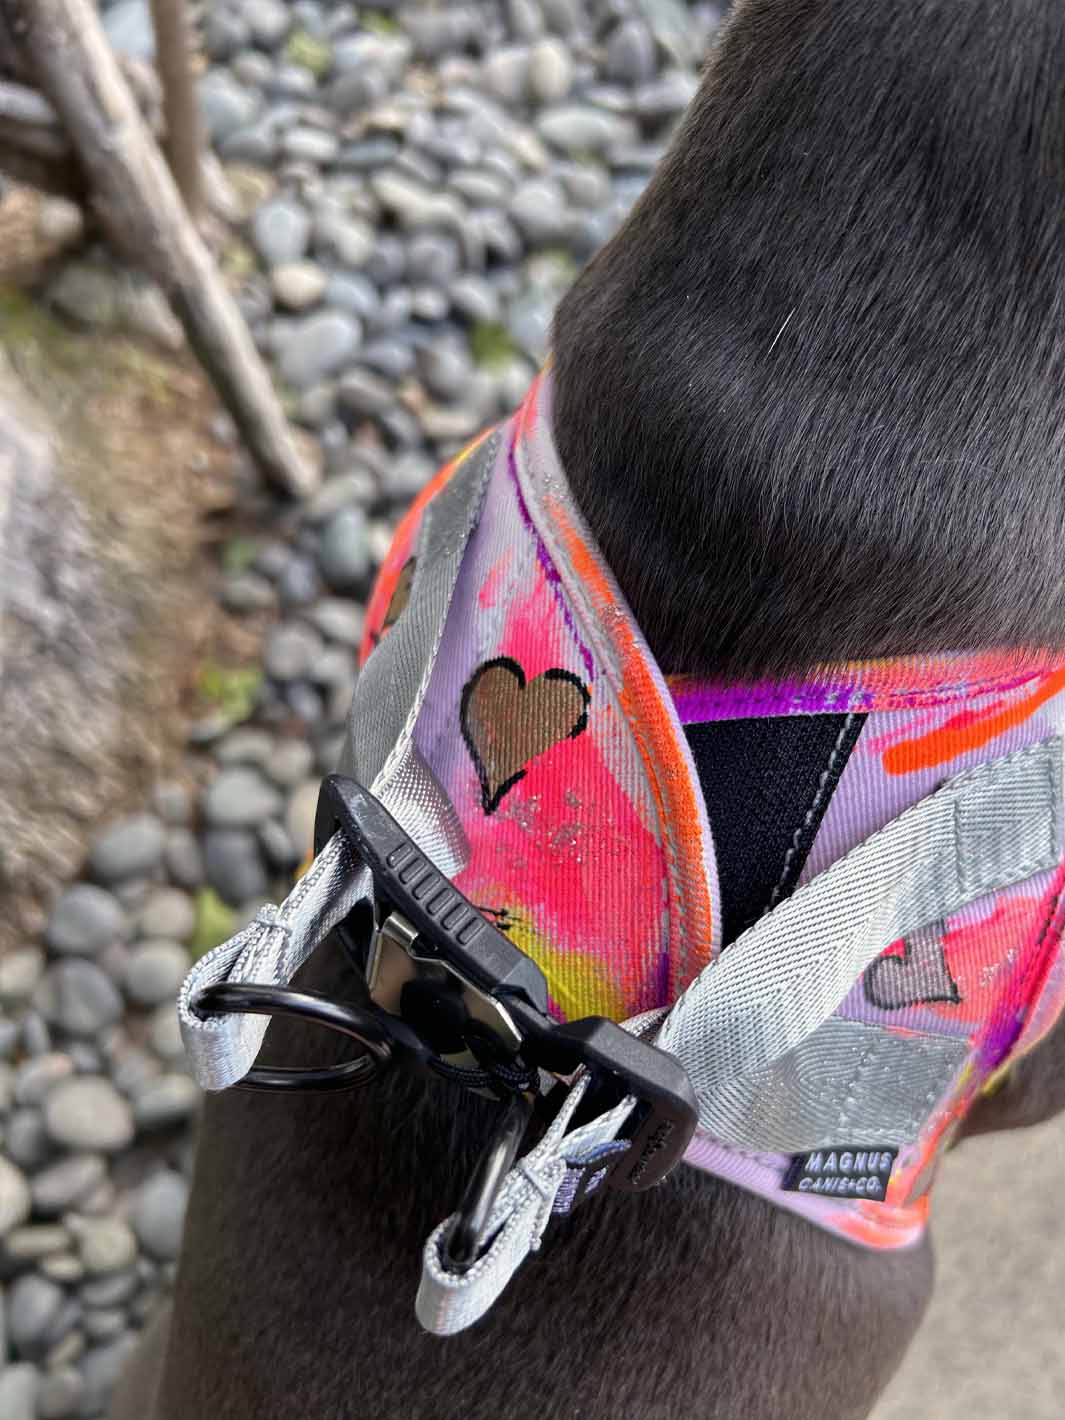 Back detail photo showing german magnetic buckle system on a french bulldog harness.